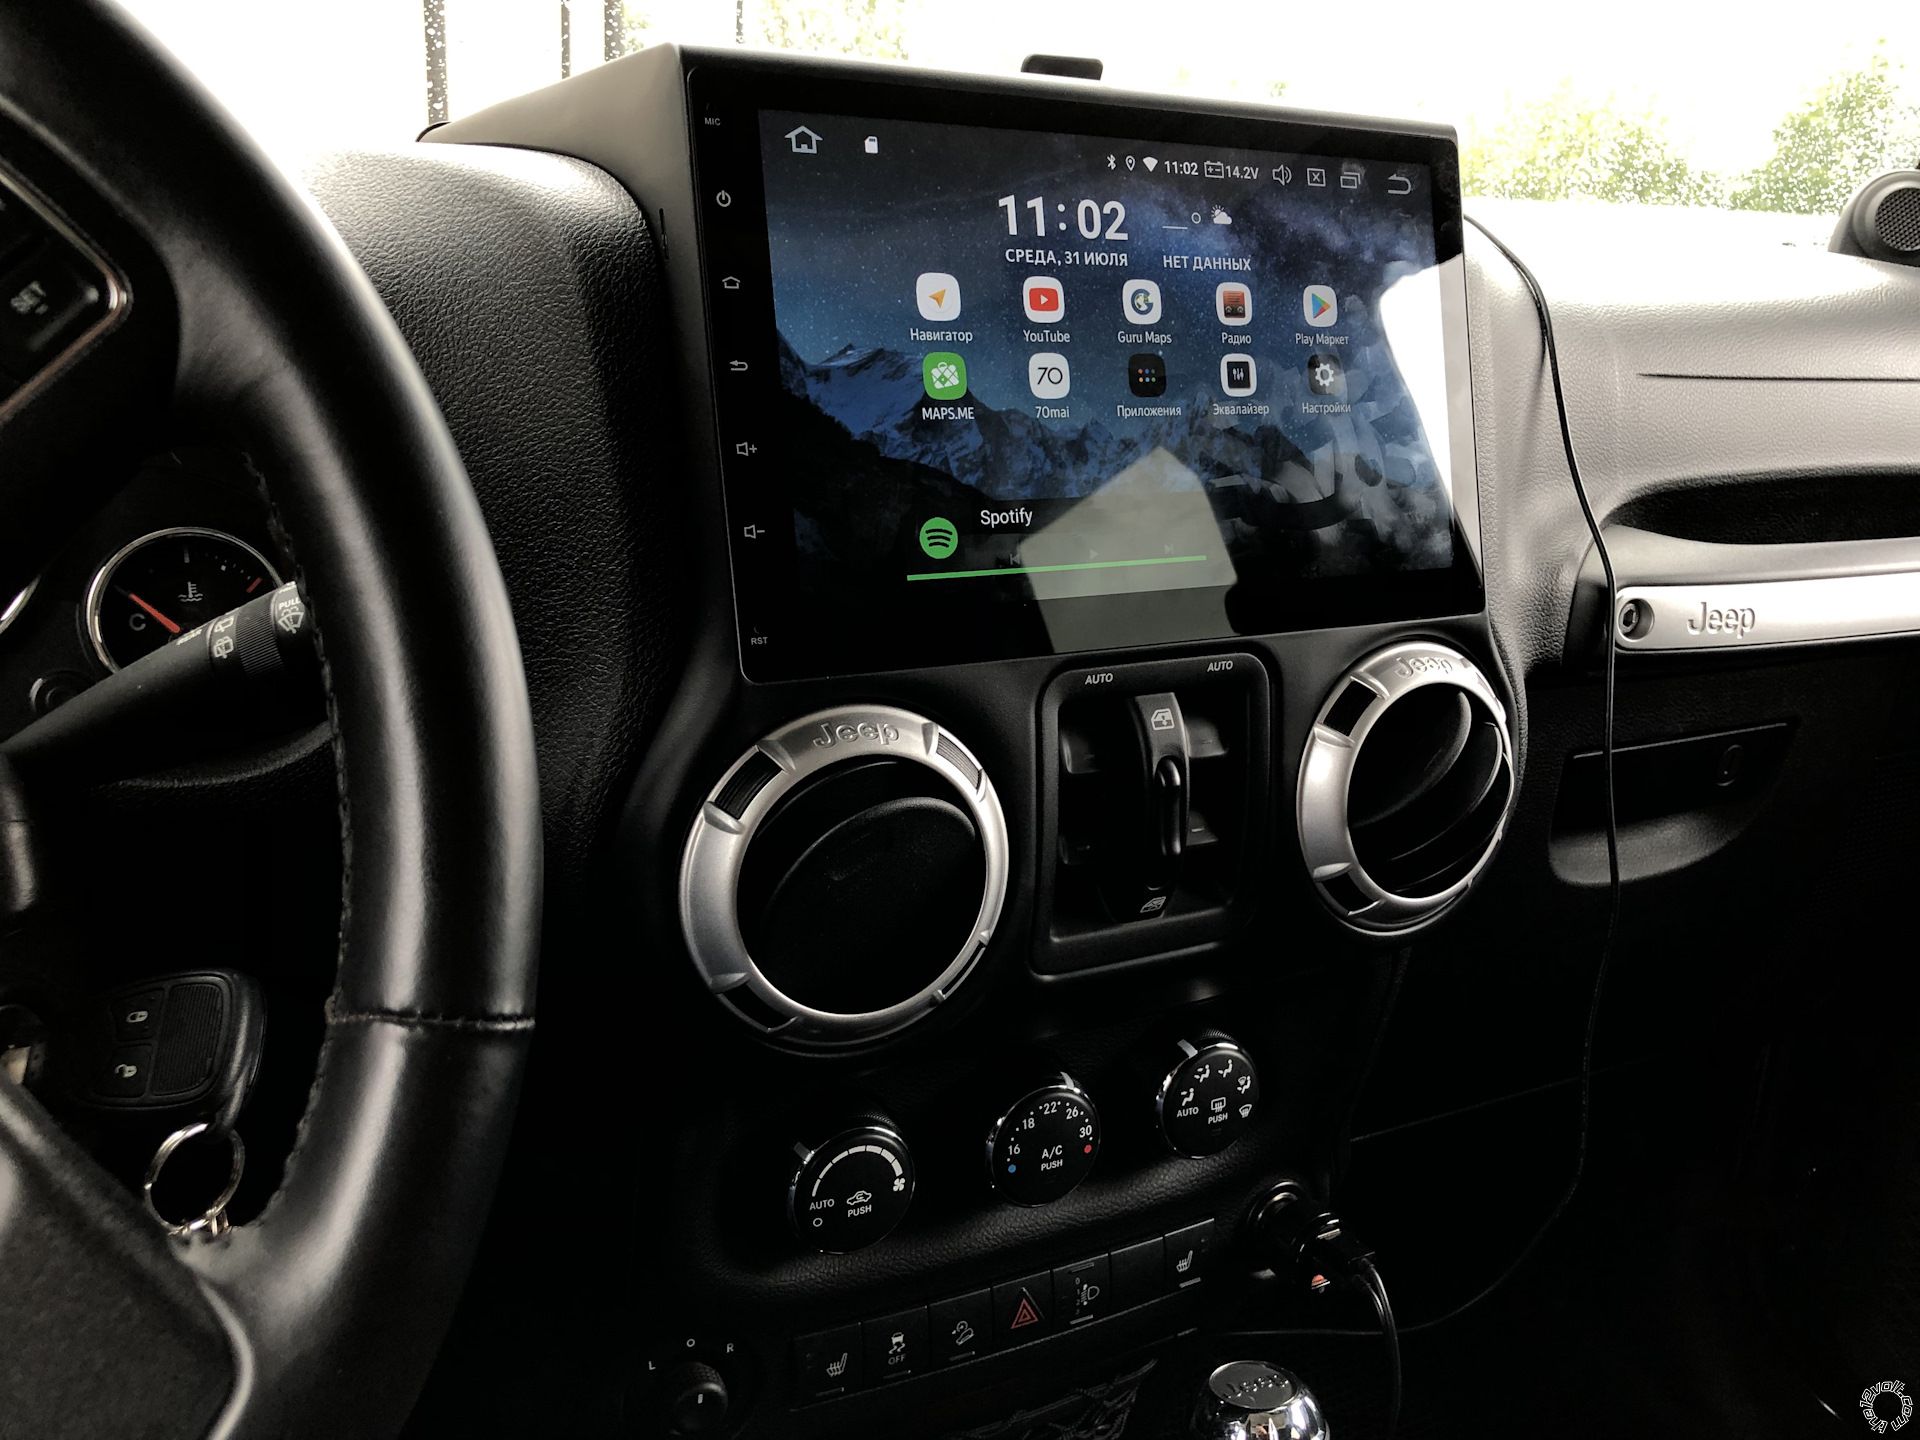 2016 Jeep Wrangler Stereo - Last Post -- posted image.